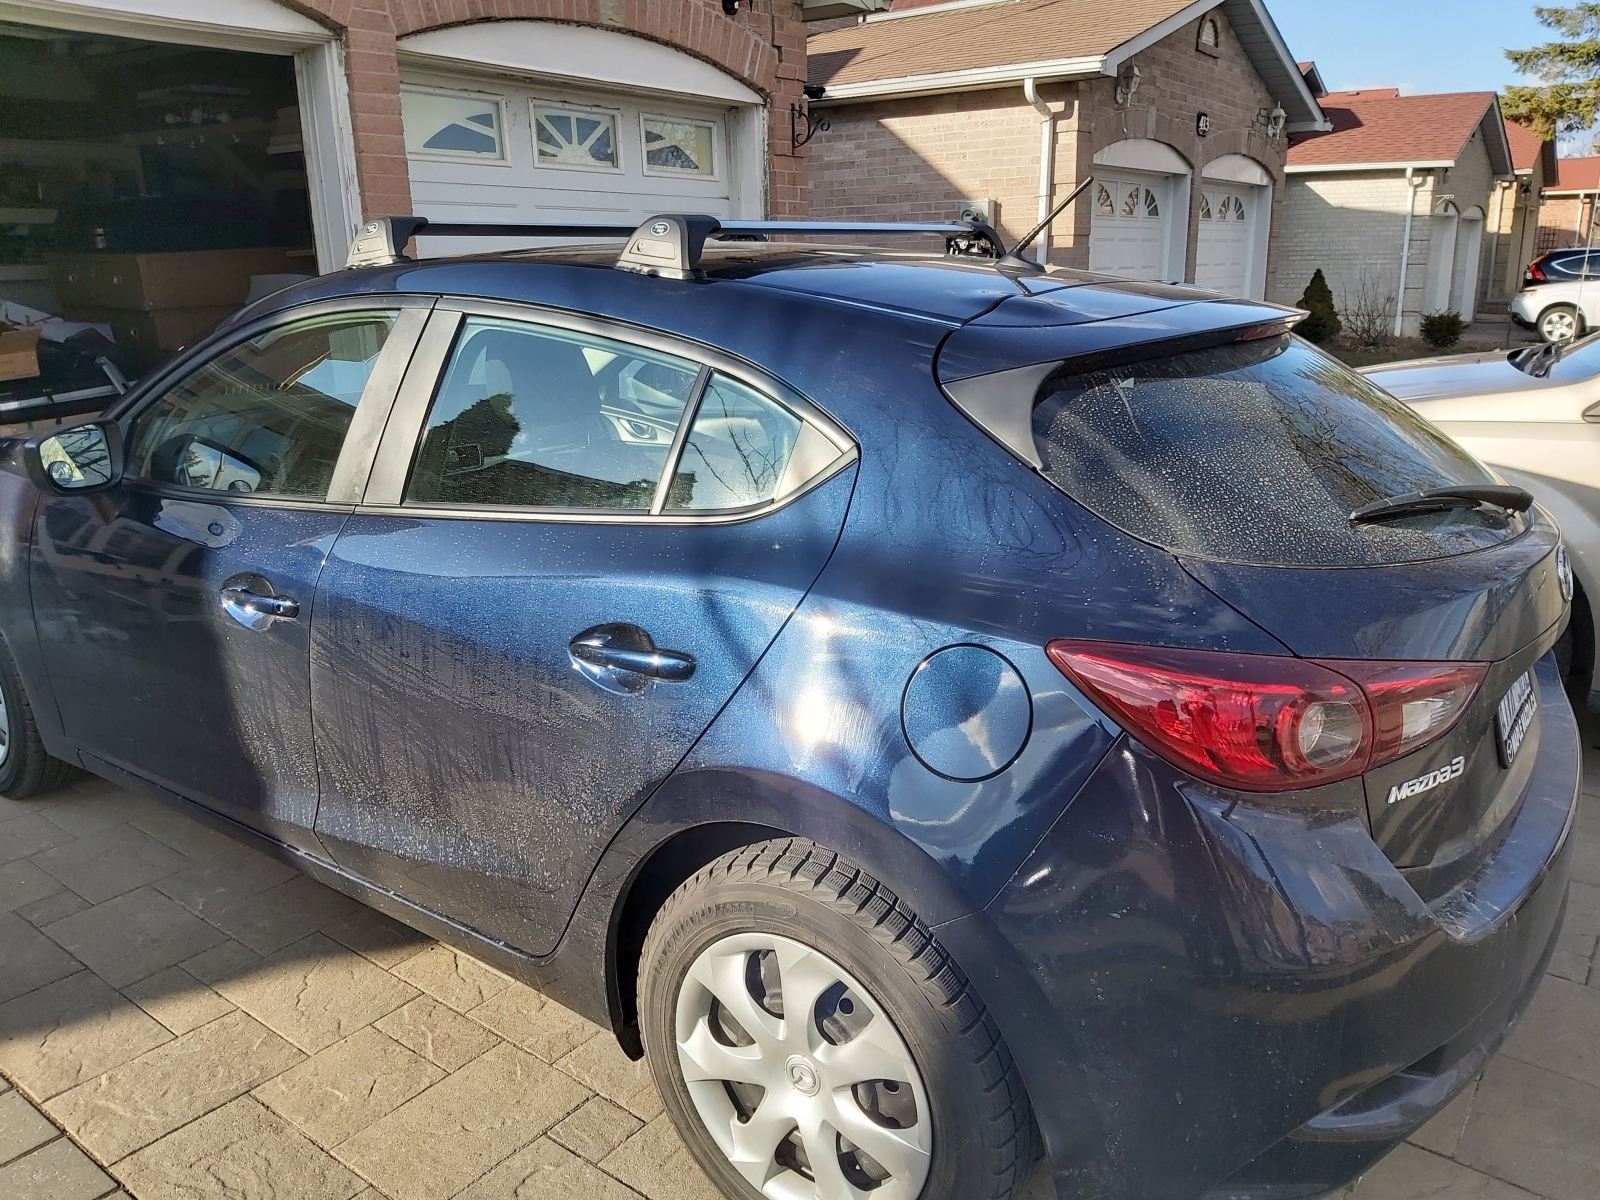 2017 Mazda 3 Fixed Mounting Points Roof Racks - RackTrip - Canada Car Racks and More! Roof Rack For 2017 Mazda 3 Hatchback